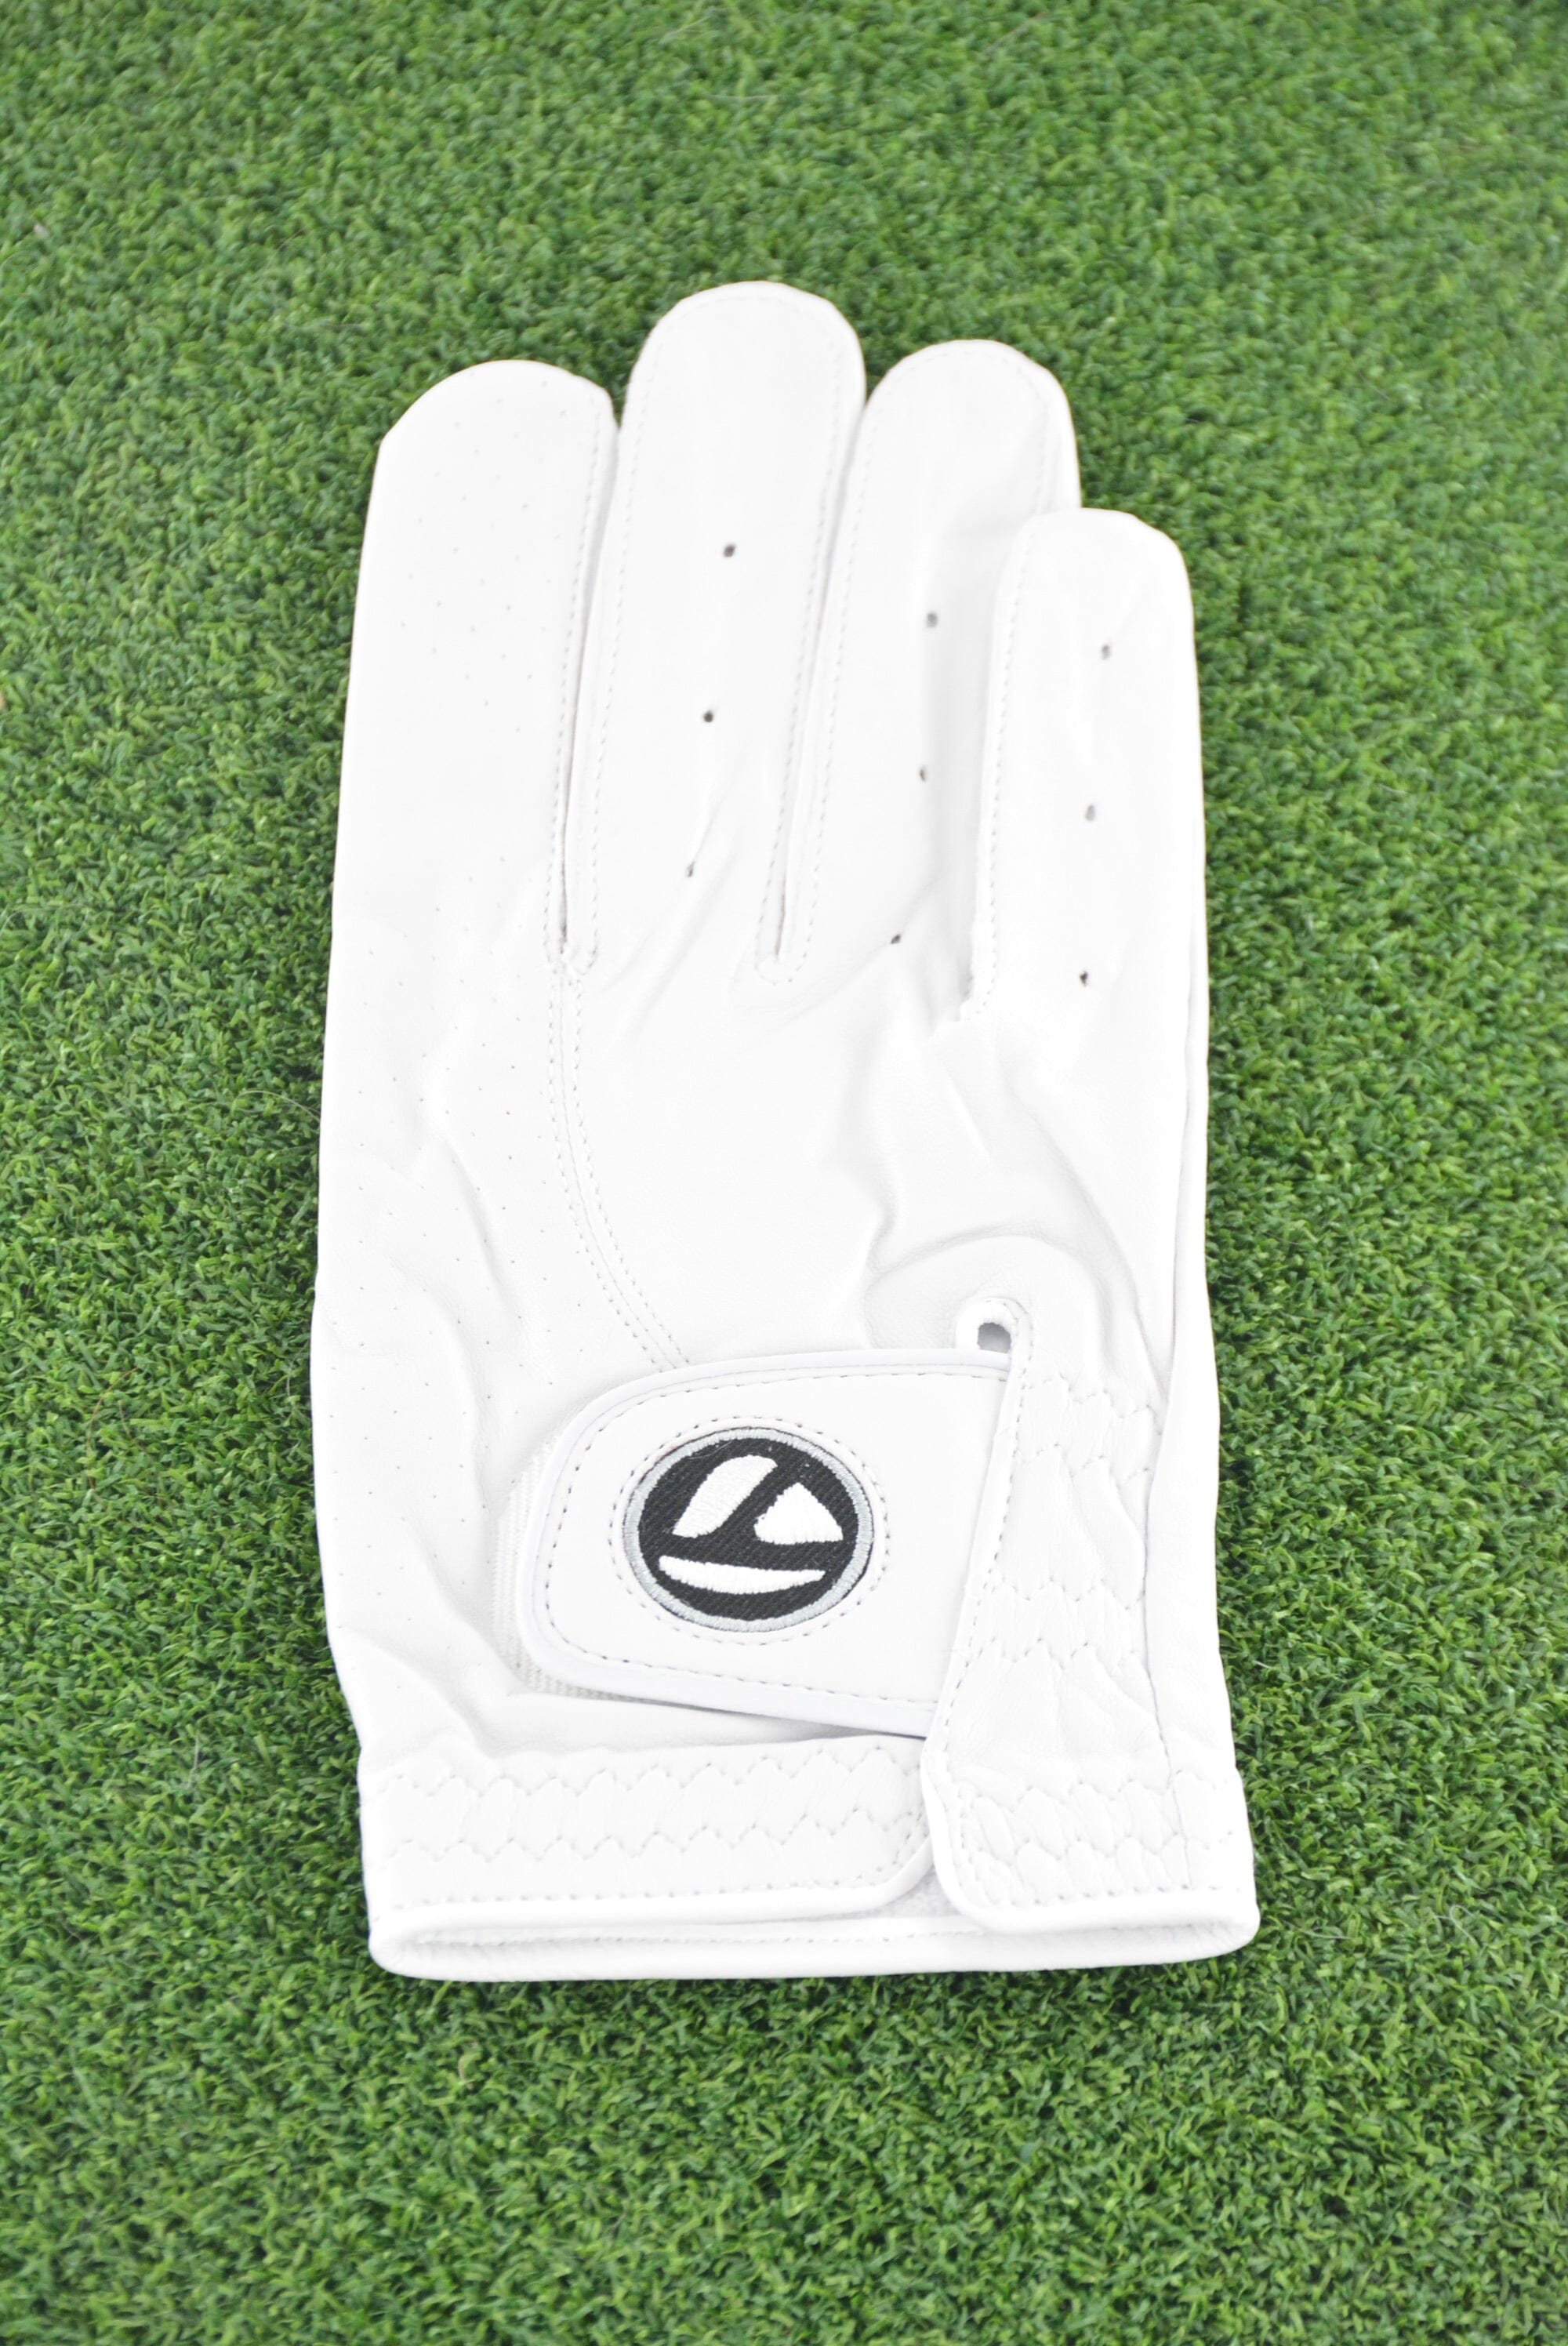 NEW RH TaylorMade '18 Tour Preferred Glove - White *FOR LEFT-HANDED GOLFERS* GolfRoots 